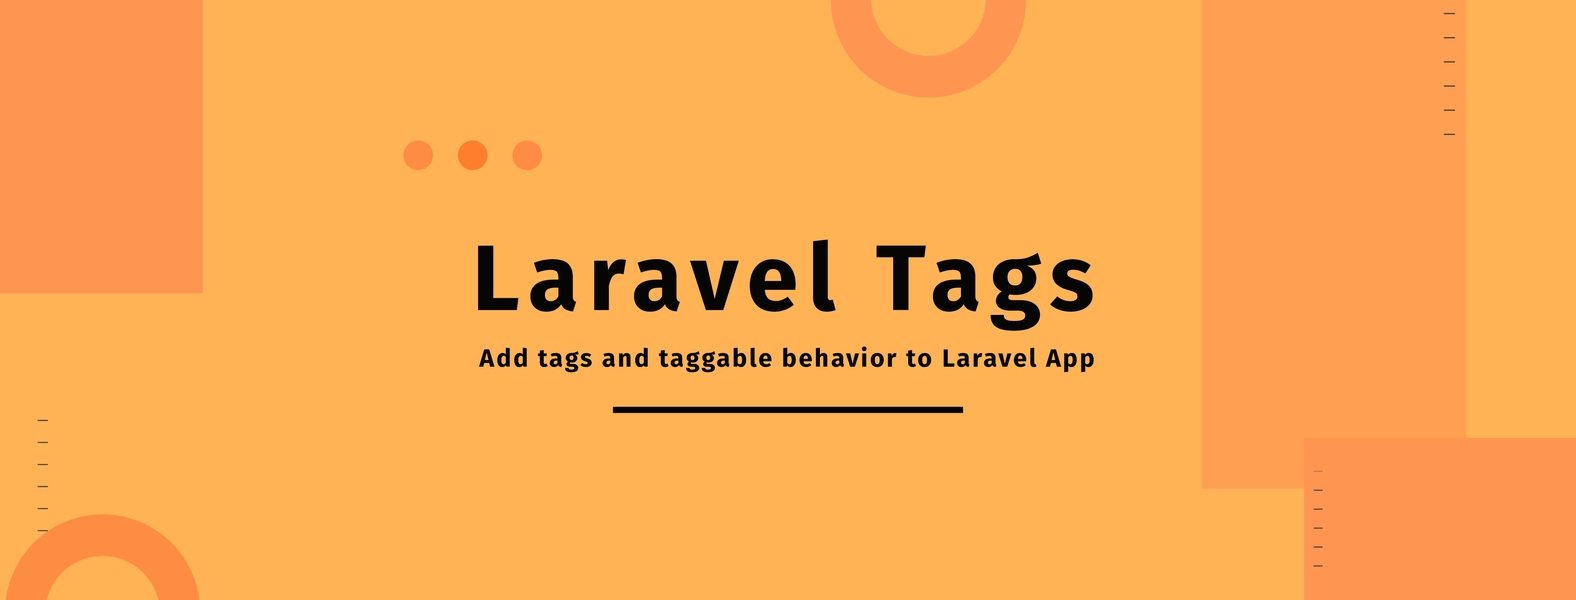 Laravel Tags - Add tags and taggable behavior to Laravel App